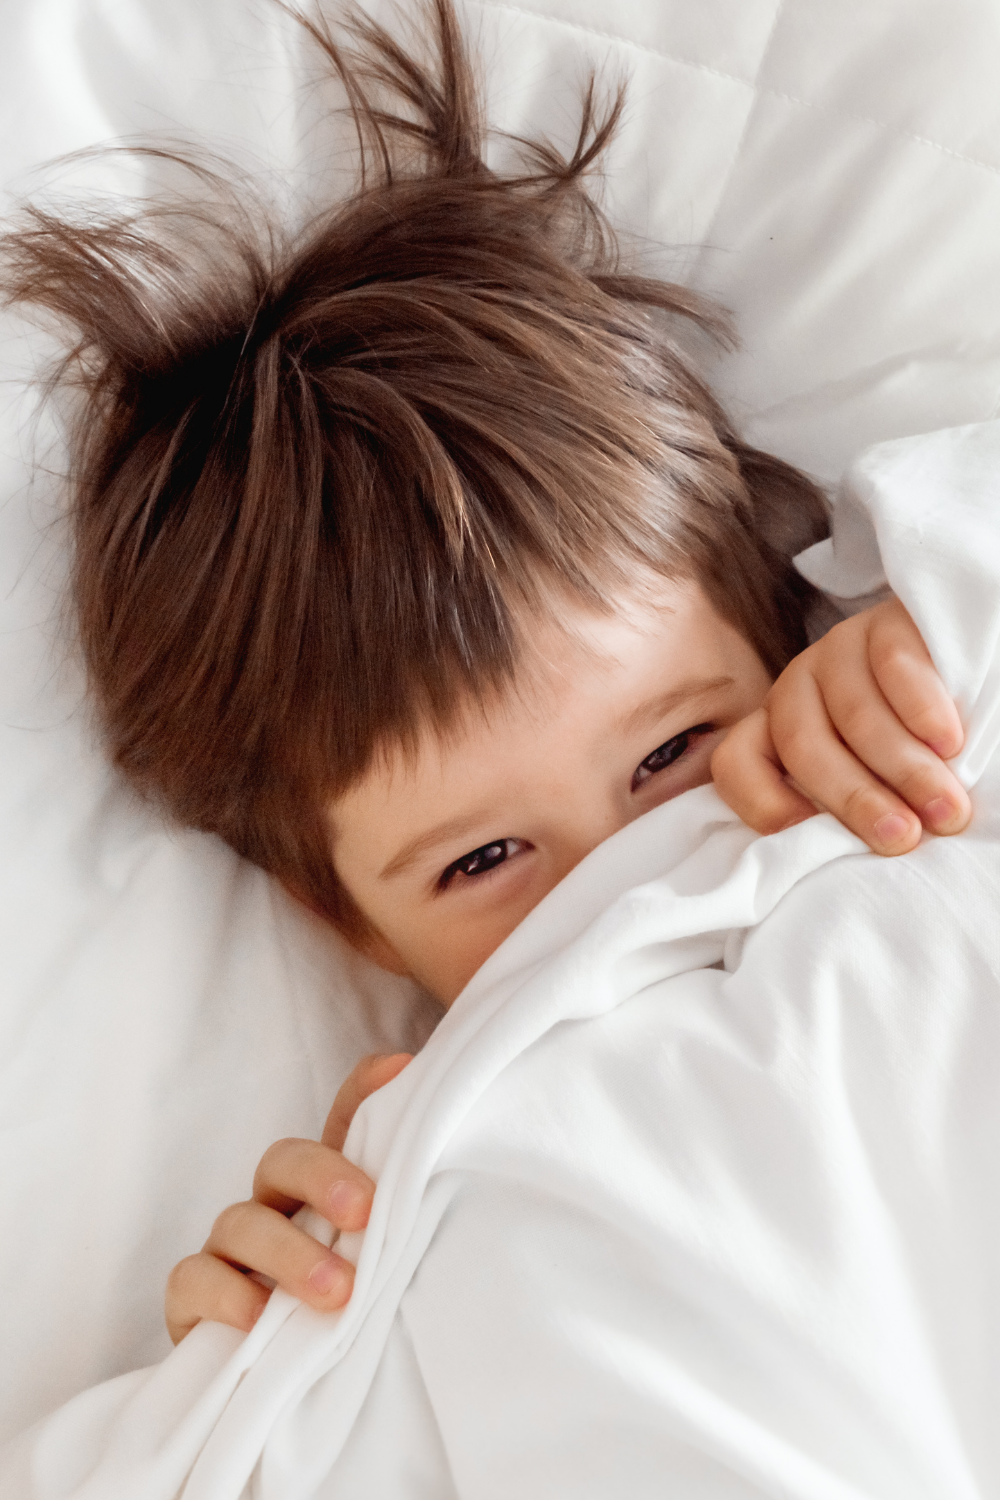 How sleep props can affect your child's sleep